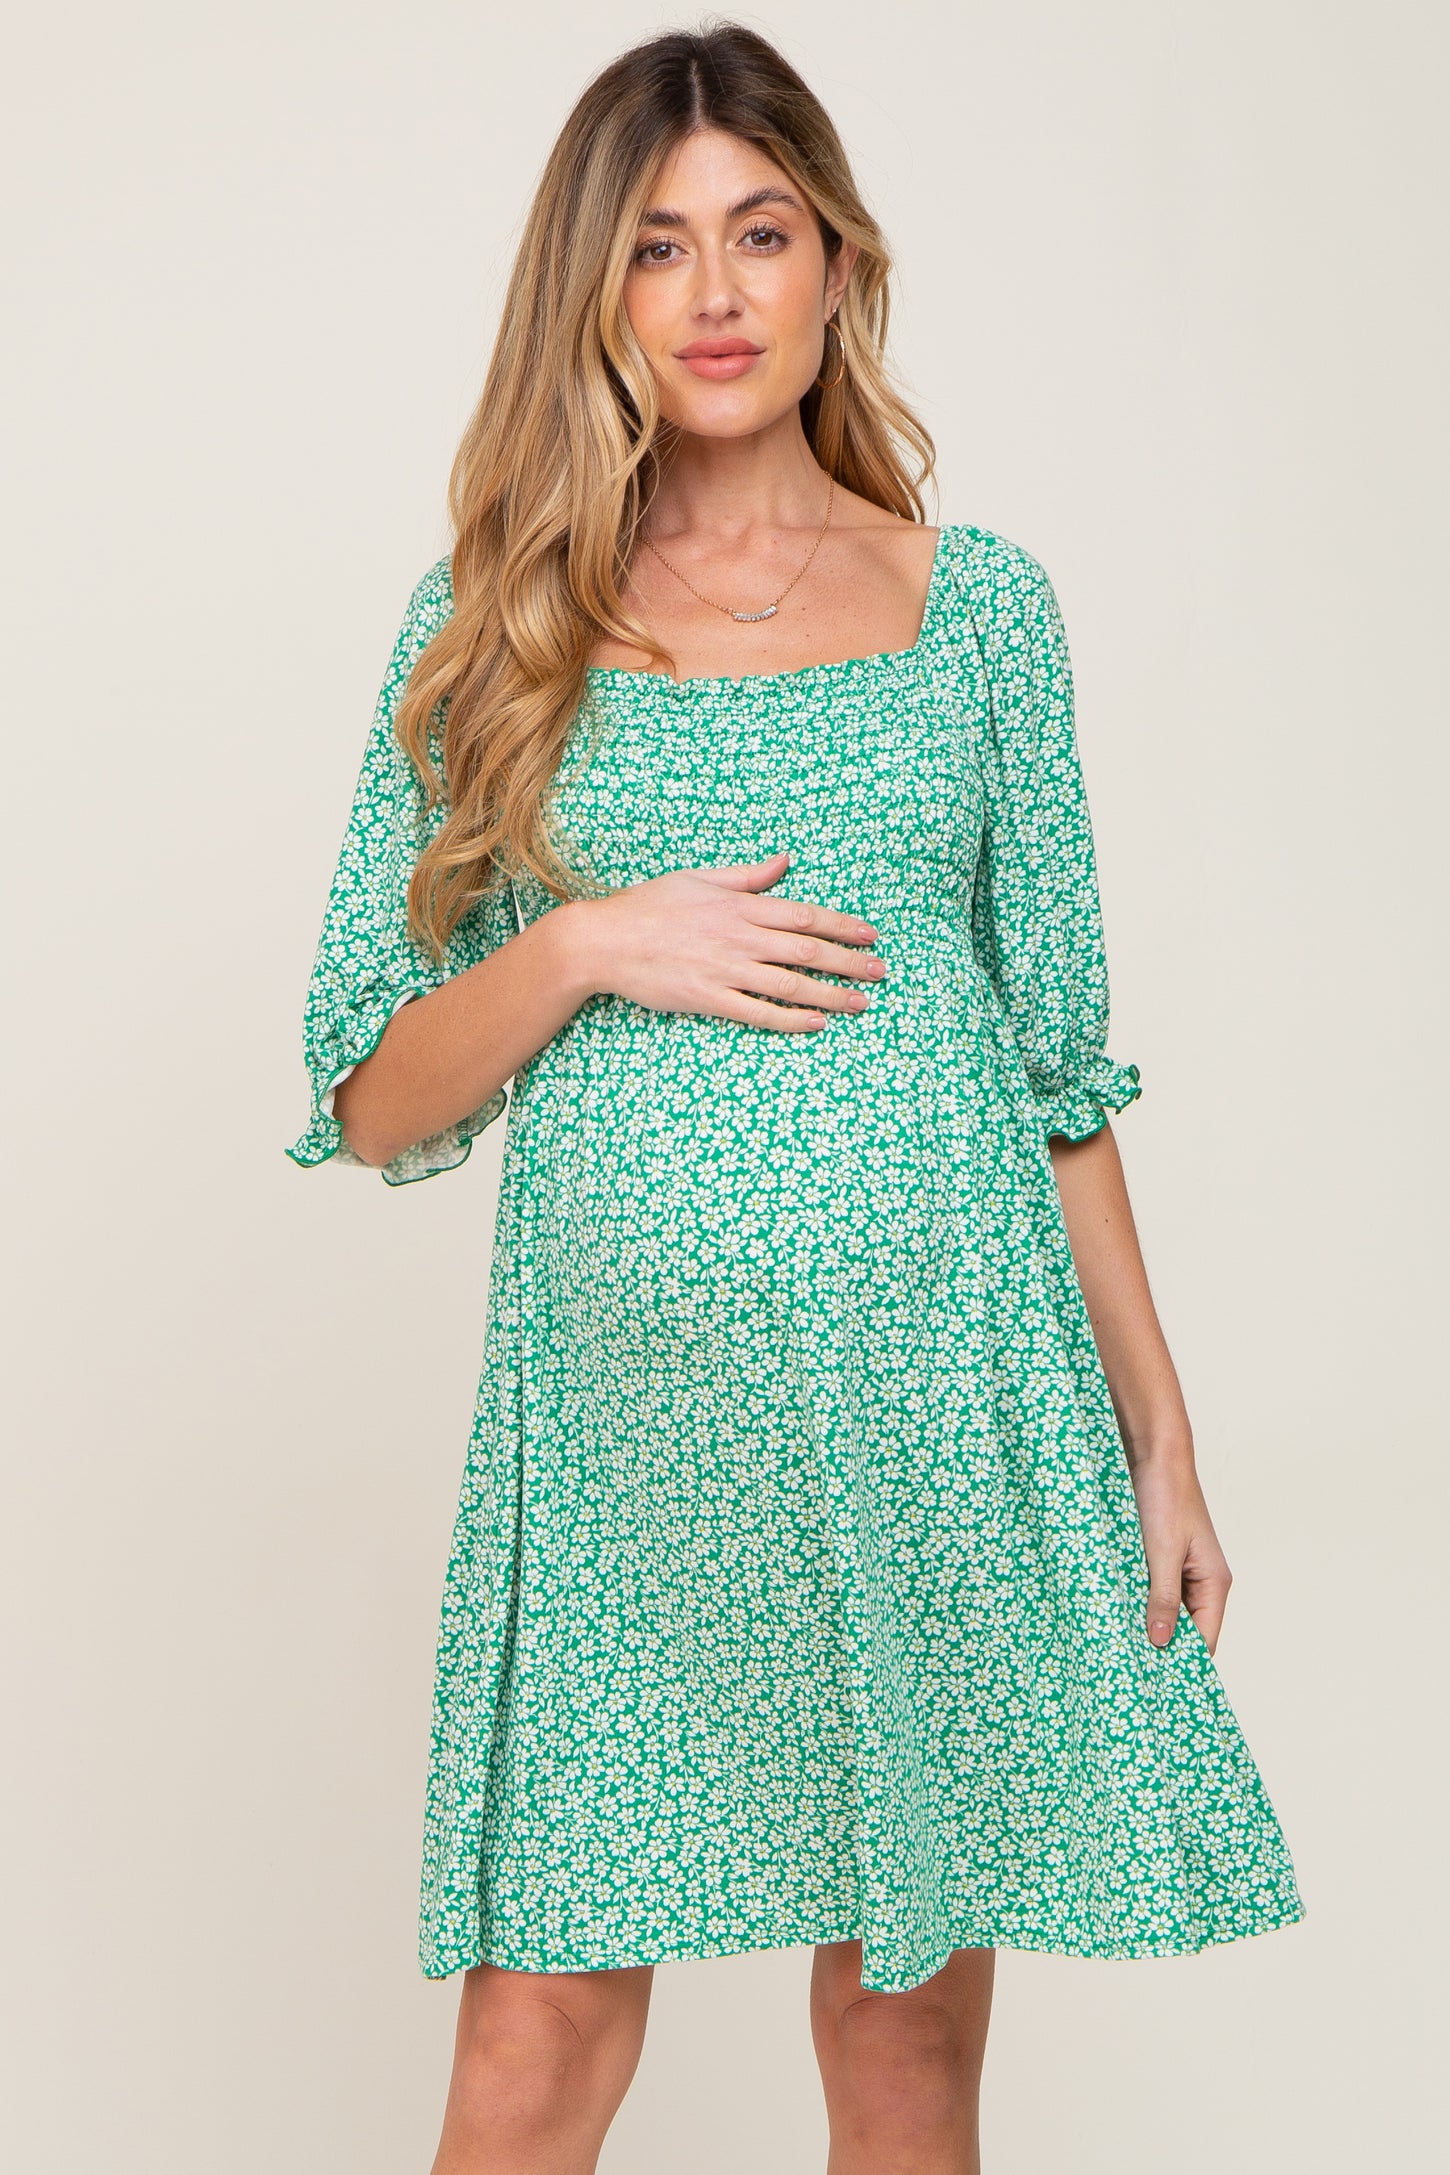 Green Floral Smocked Square Neck Maternity Dress– PinkBlush